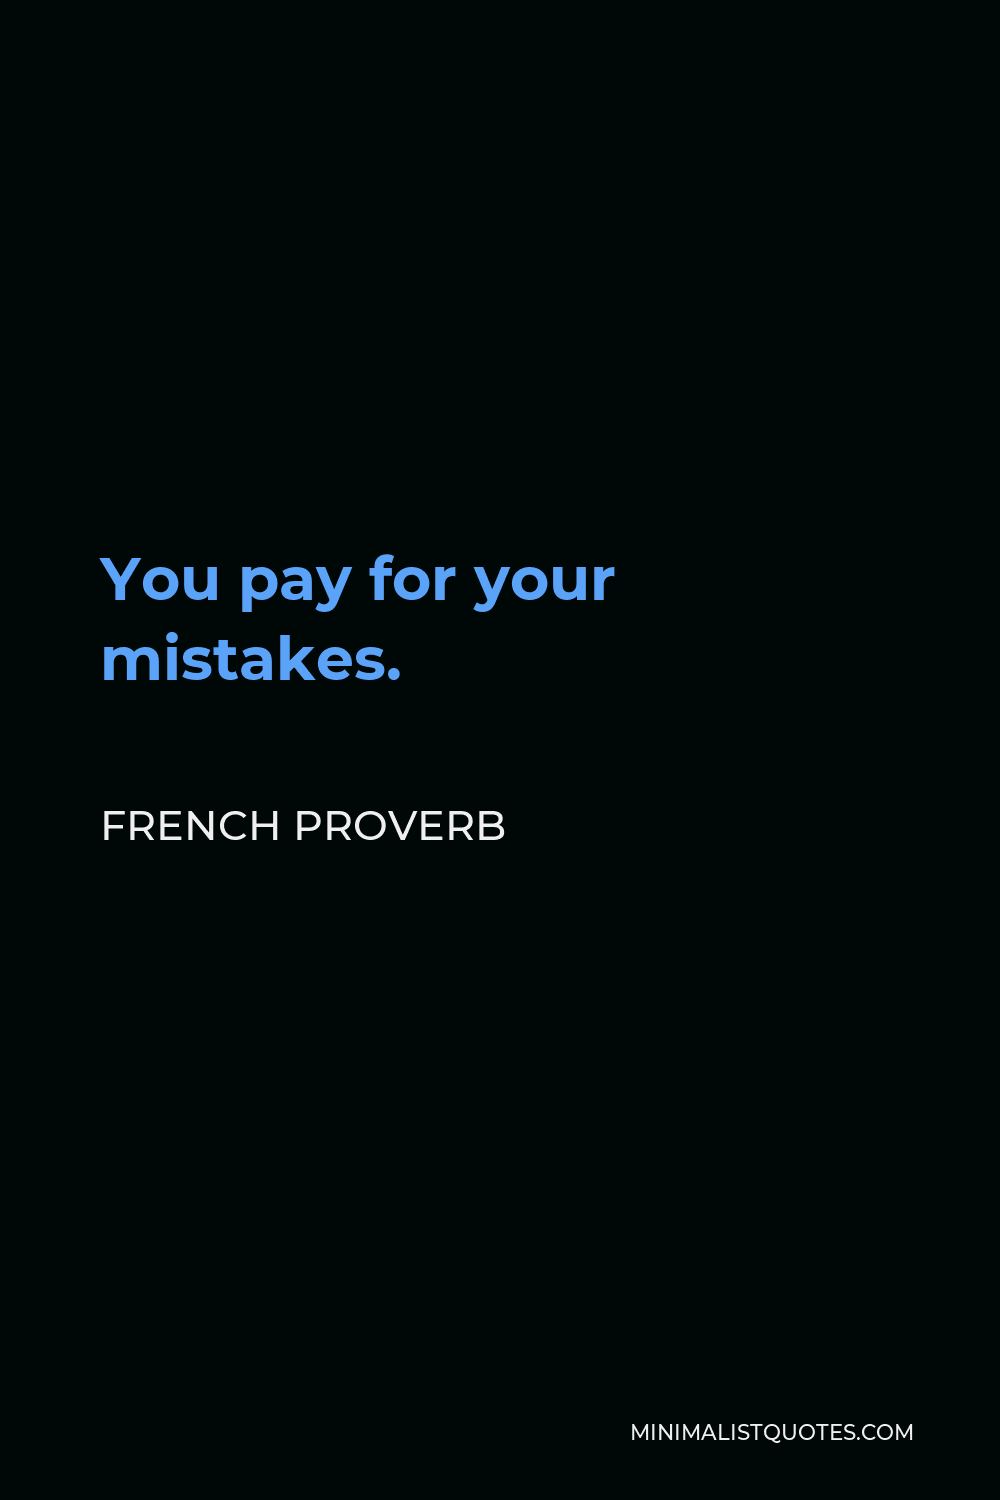 French Proverb Quote - You pay for your mistakes.